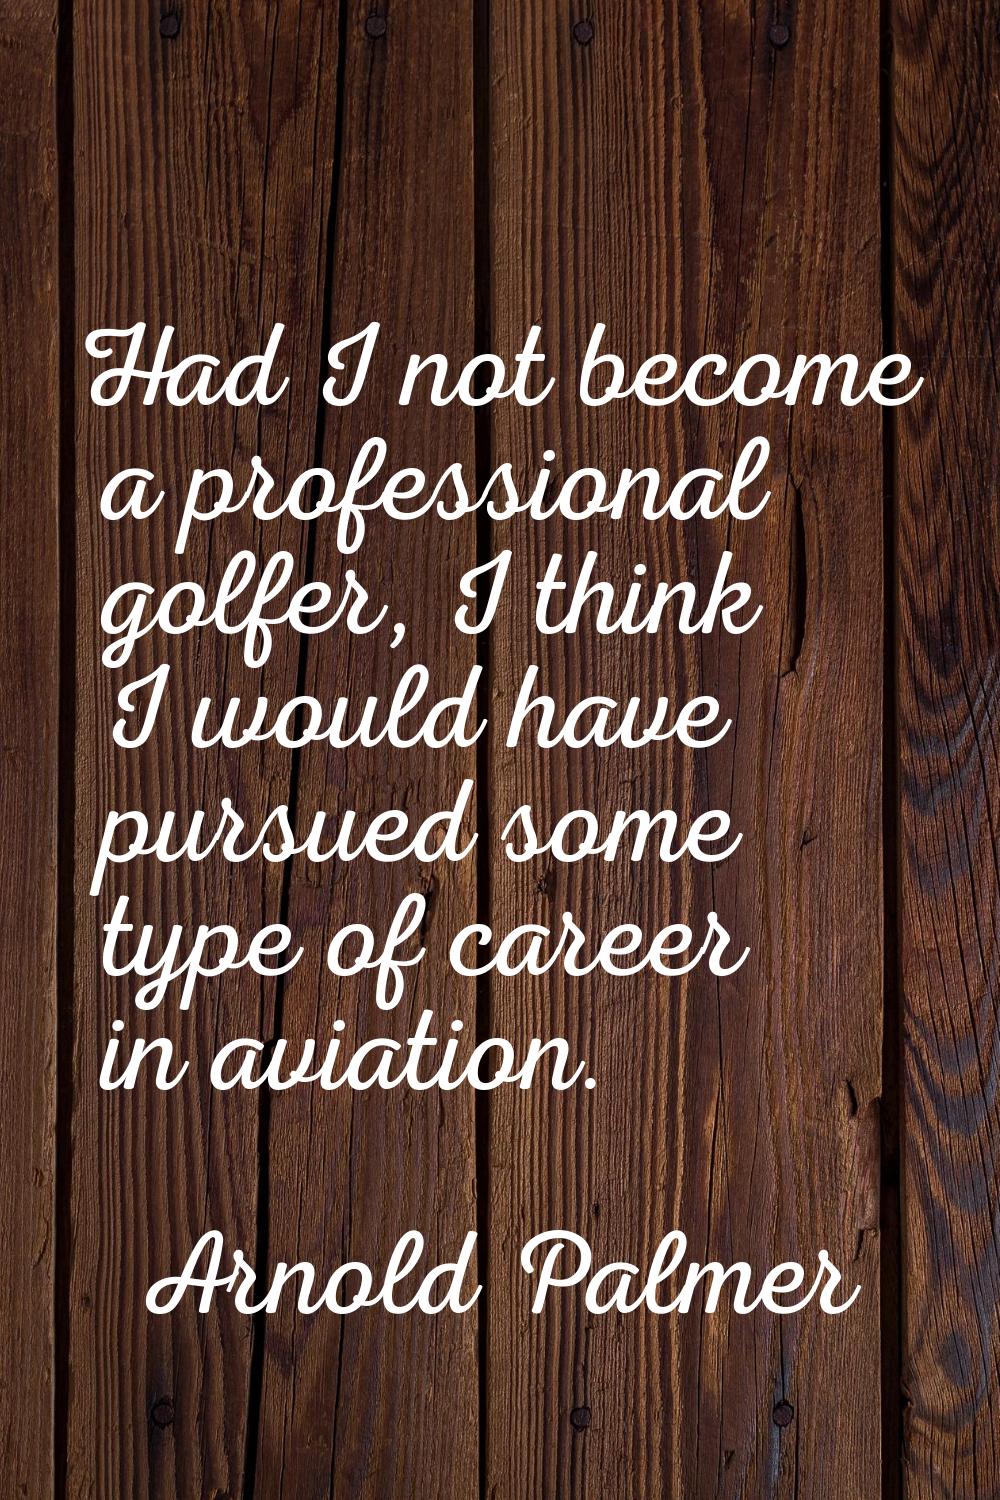 Had I not become a professional golfer, I think I would have pursued some type of career in aviatio